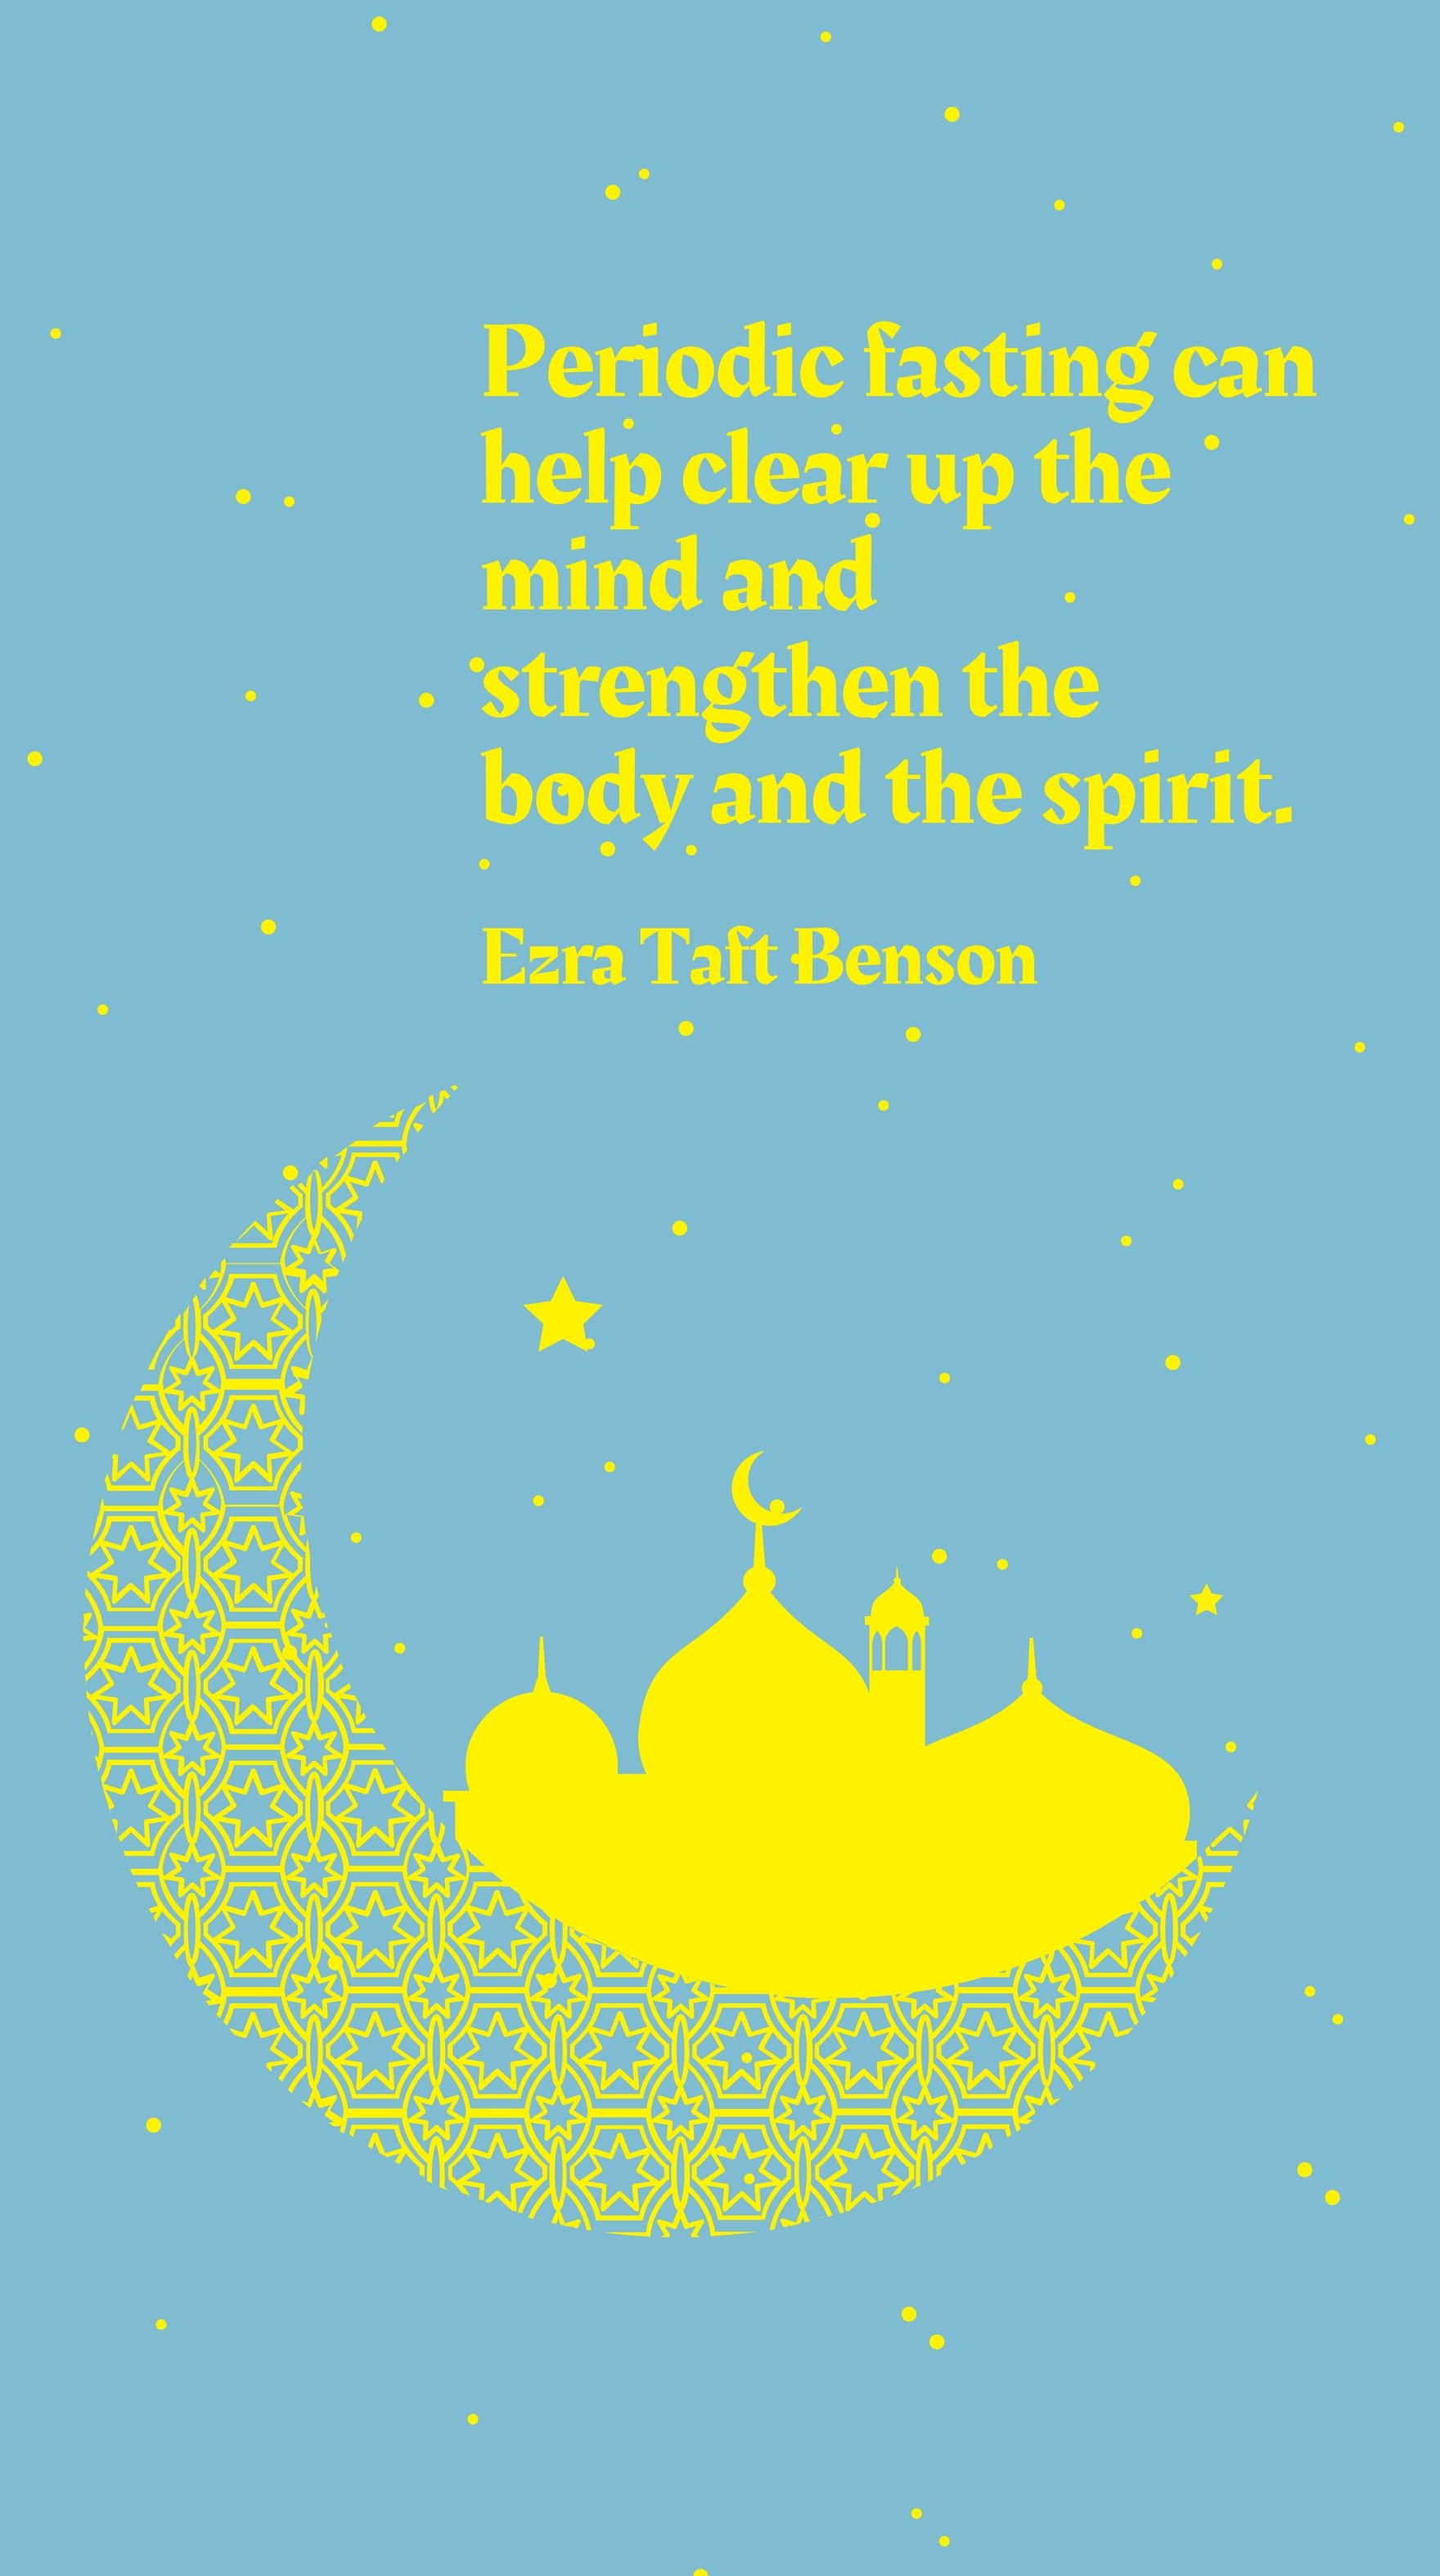 Ezra Taft Benson - Periodic fasting can help clear up the mind and strengthen the body and the spirit. in JPG